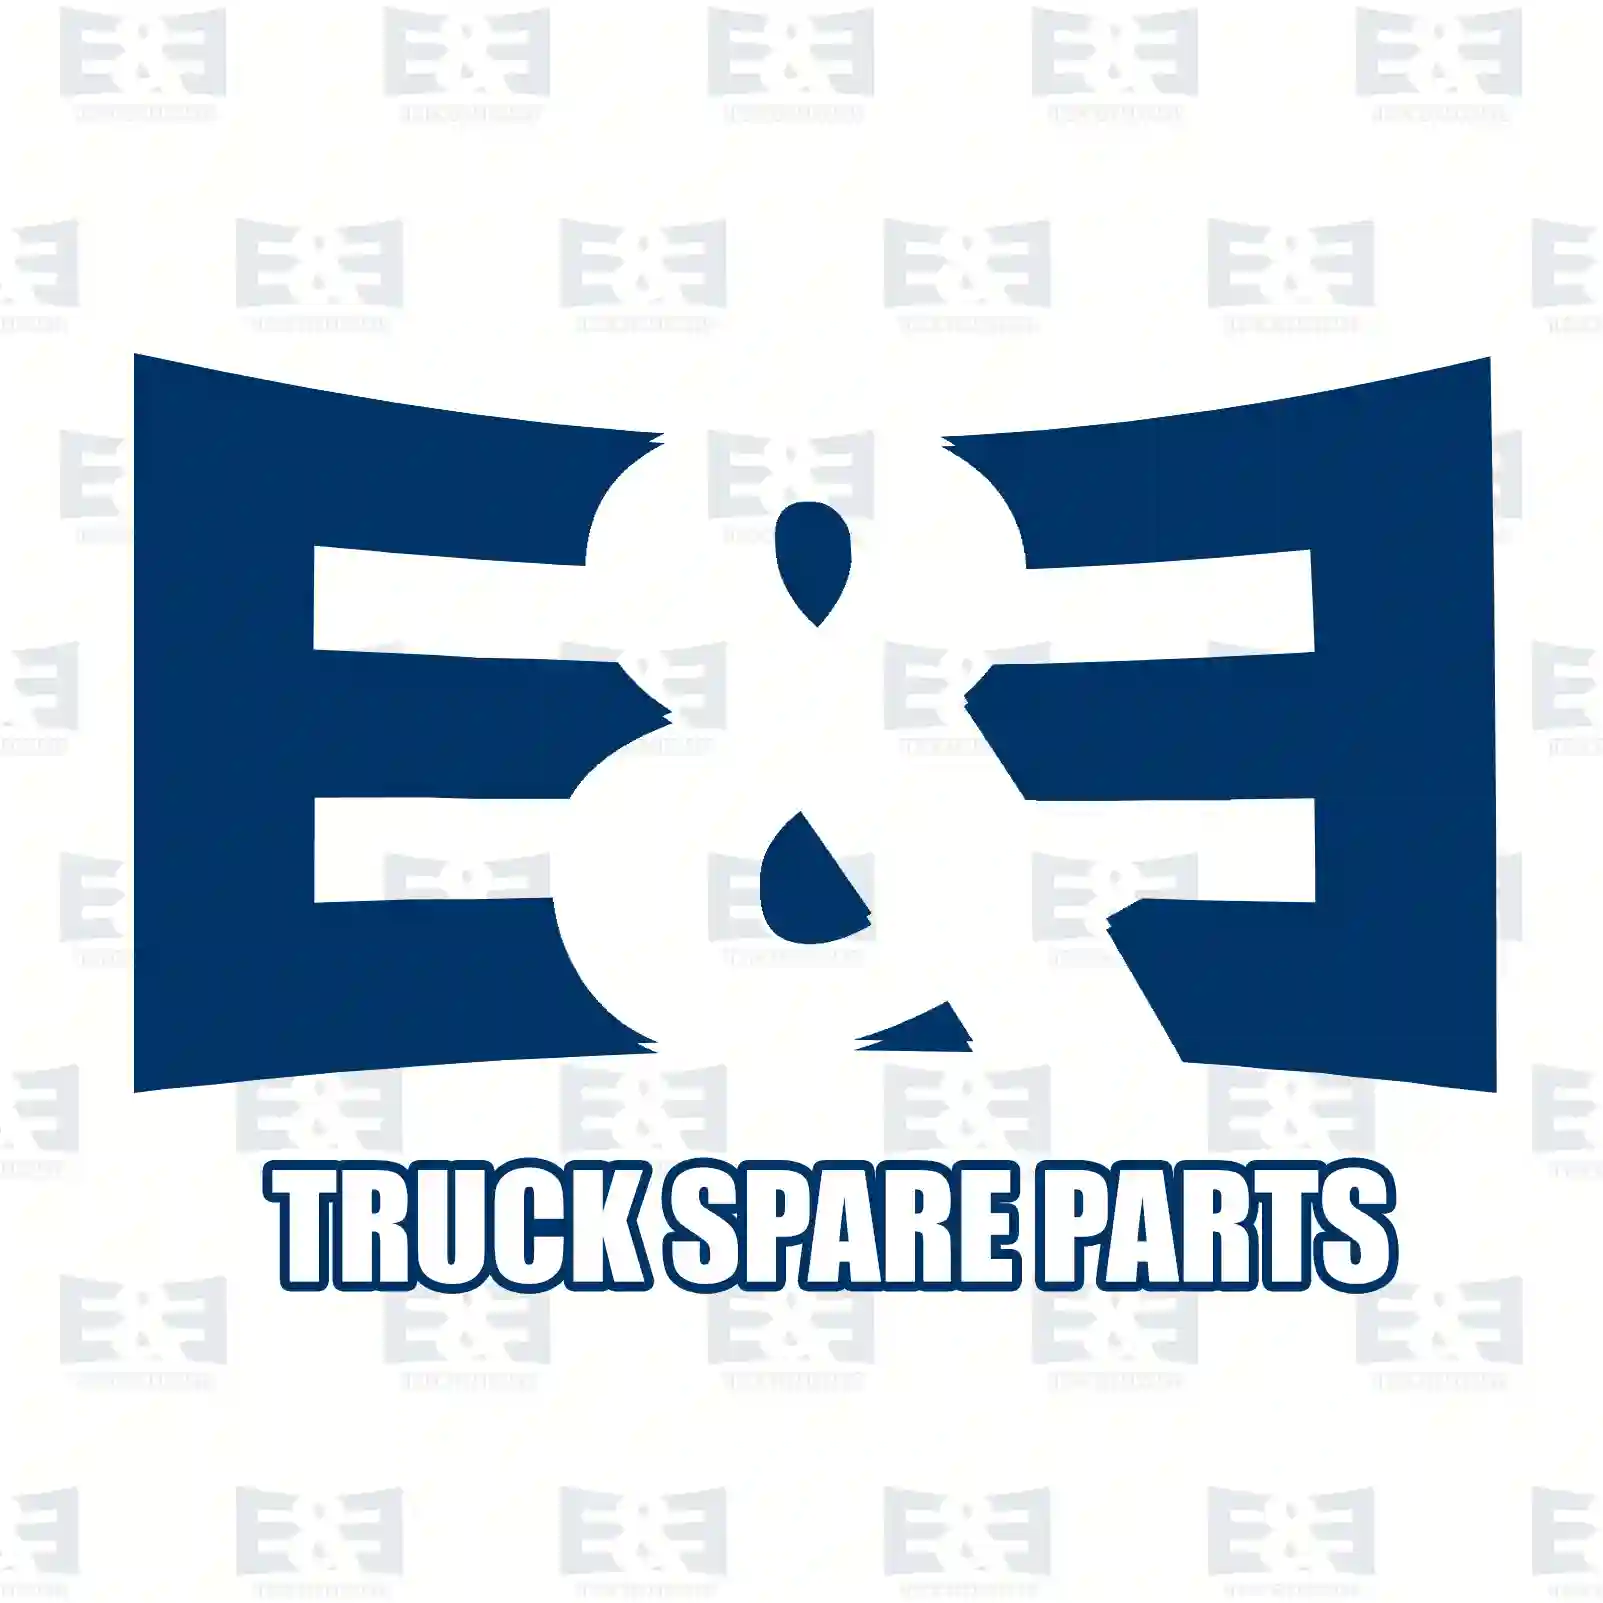 Bearing joint, complete with seal rings, 2E2275195, 2171713, ZG40856-0008, ||  2E2275195 E&E Truck Spare Parts | Truck Spare Parts, Auotomotive Spare Parts Bearing joint, complete with seal rings, 2E2275195, 2171713, ZG40856-0008, ||  2E2275195 E&E Truck Spare Parts | Truck Spare Parts, Auotomotive Spare Parts